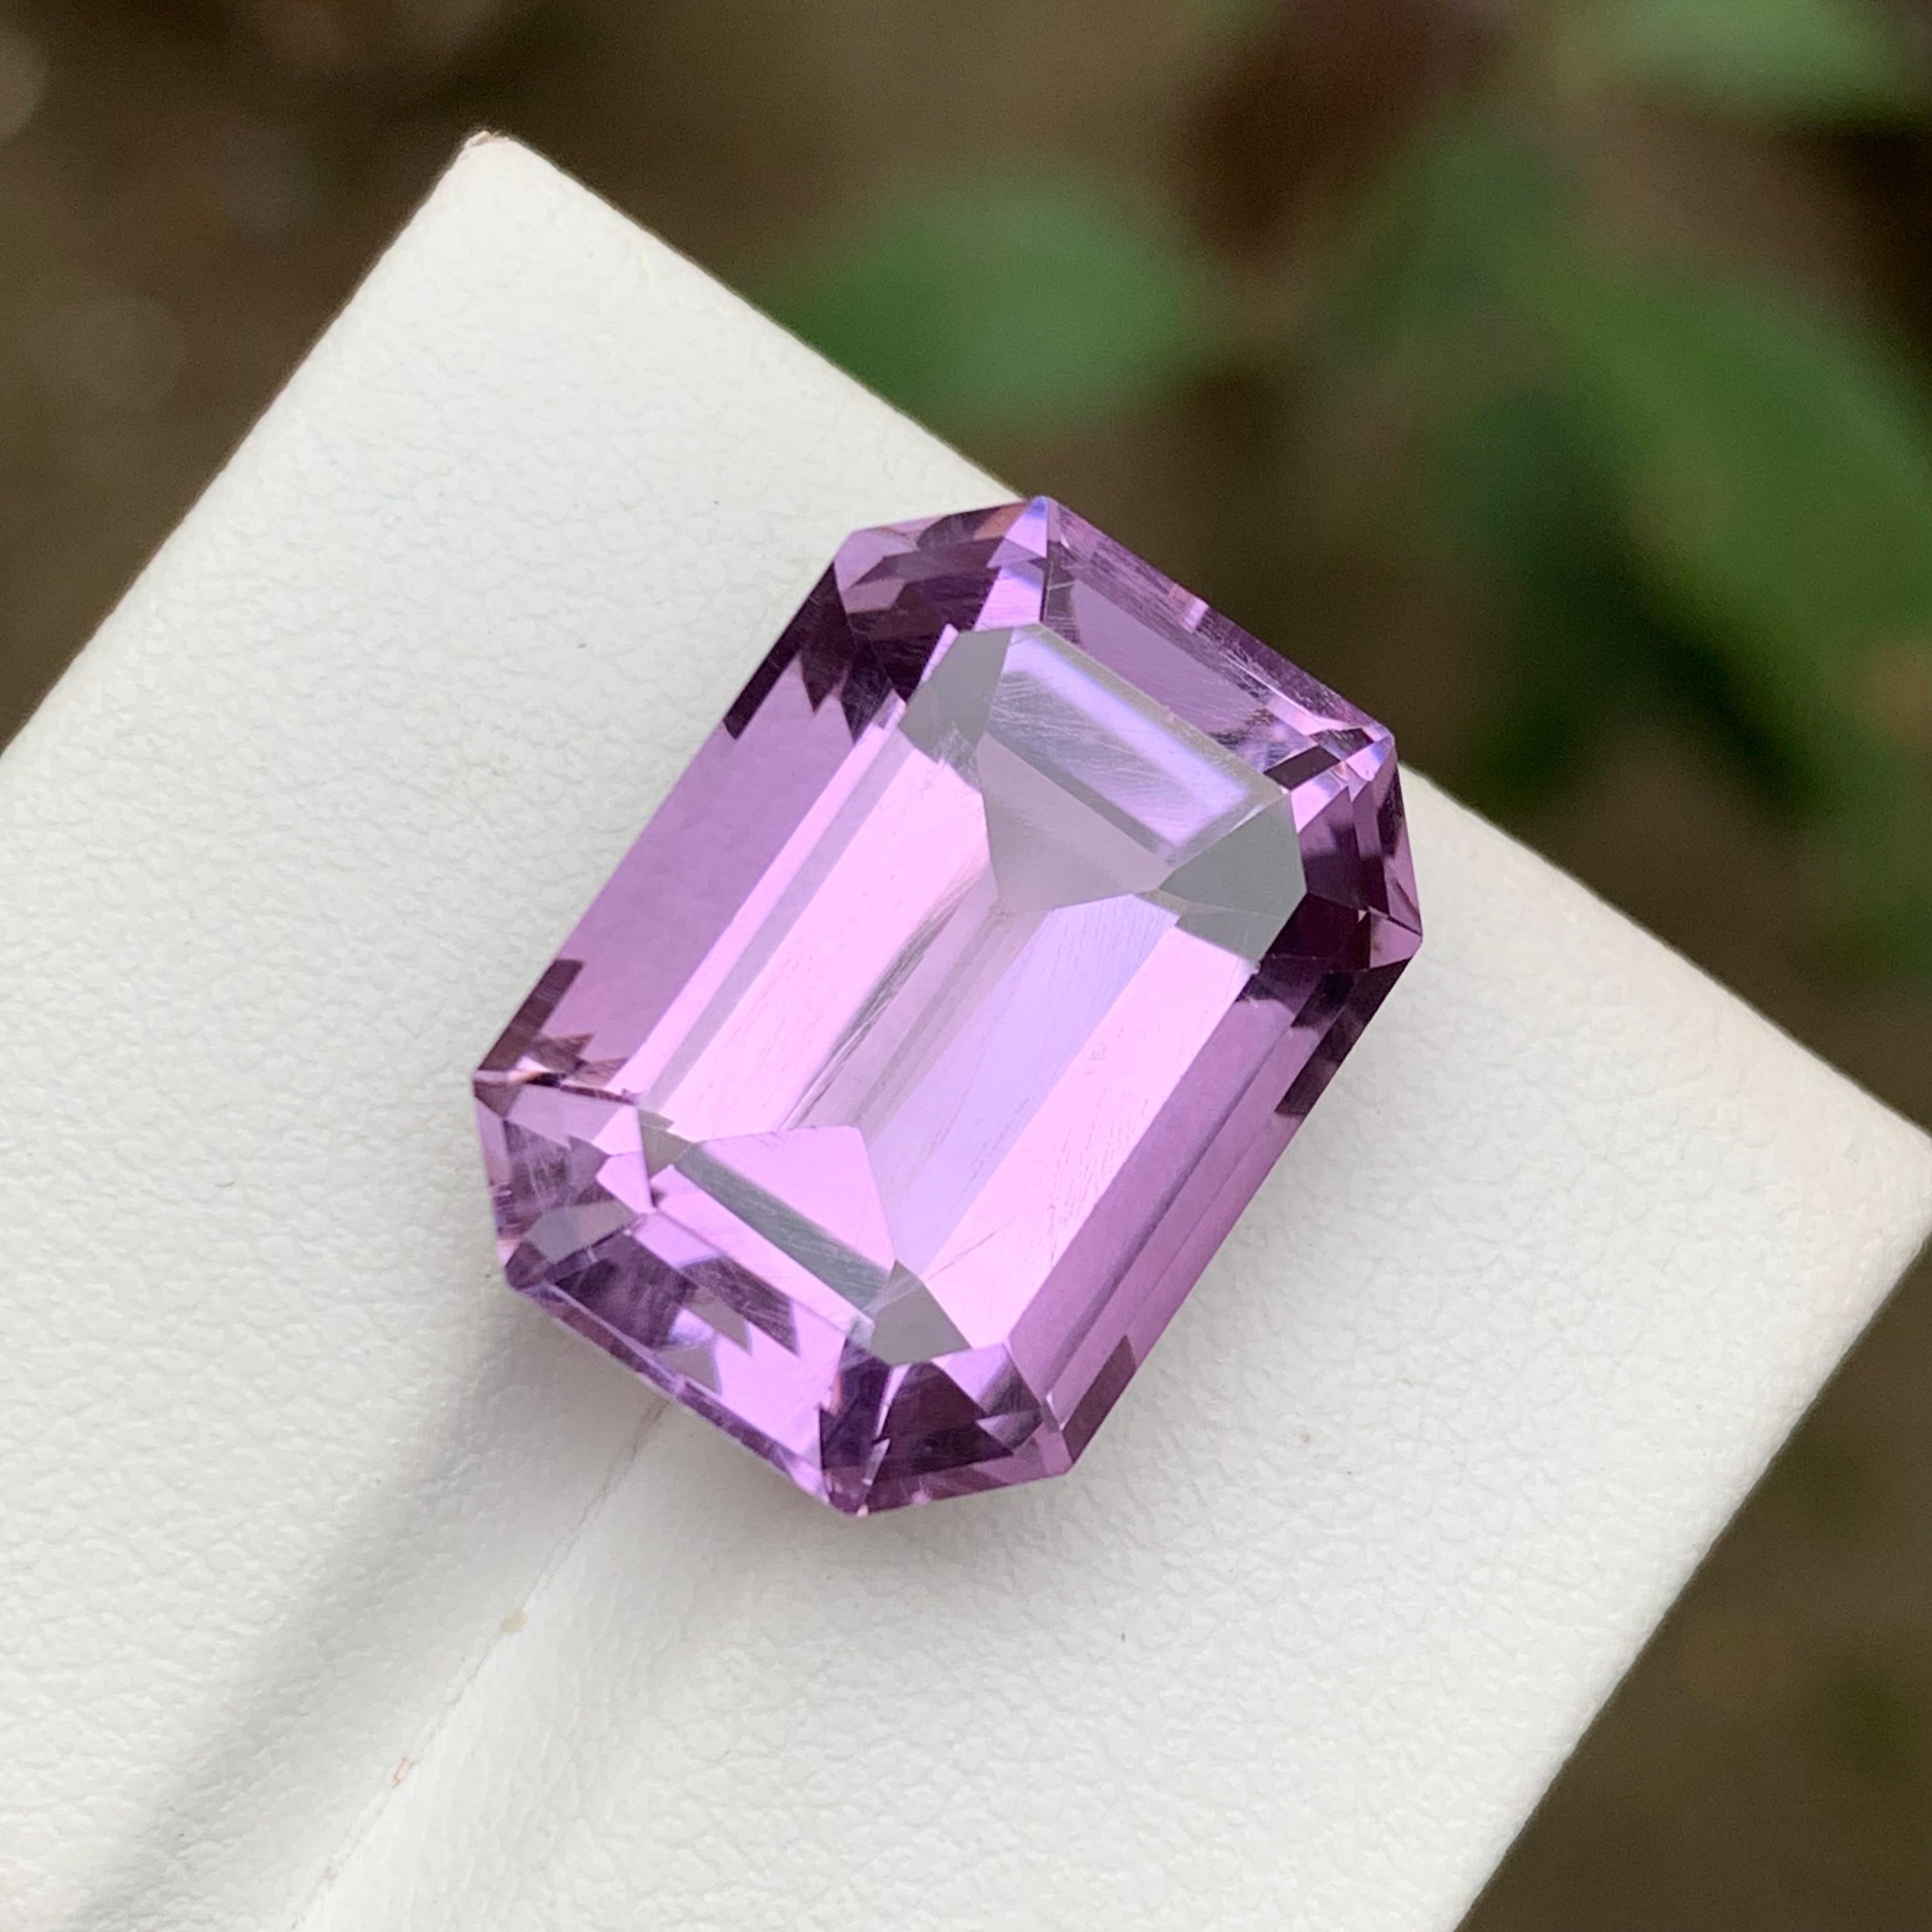 GEMSTONE TYPE: Amethyst 
PIECE(S): 1
WEIGHT: 17.05 Carats
SHAPE: Step Emerald Cut
SIZE (MM): 17.65 x 13.02 x 10.44
COLOR: Purple
CLARITY: Eye Clean
TREATMENT: None
ORIGIN: Africa
CERTIFICATE: On demand
(if you require a certificate, kindly request